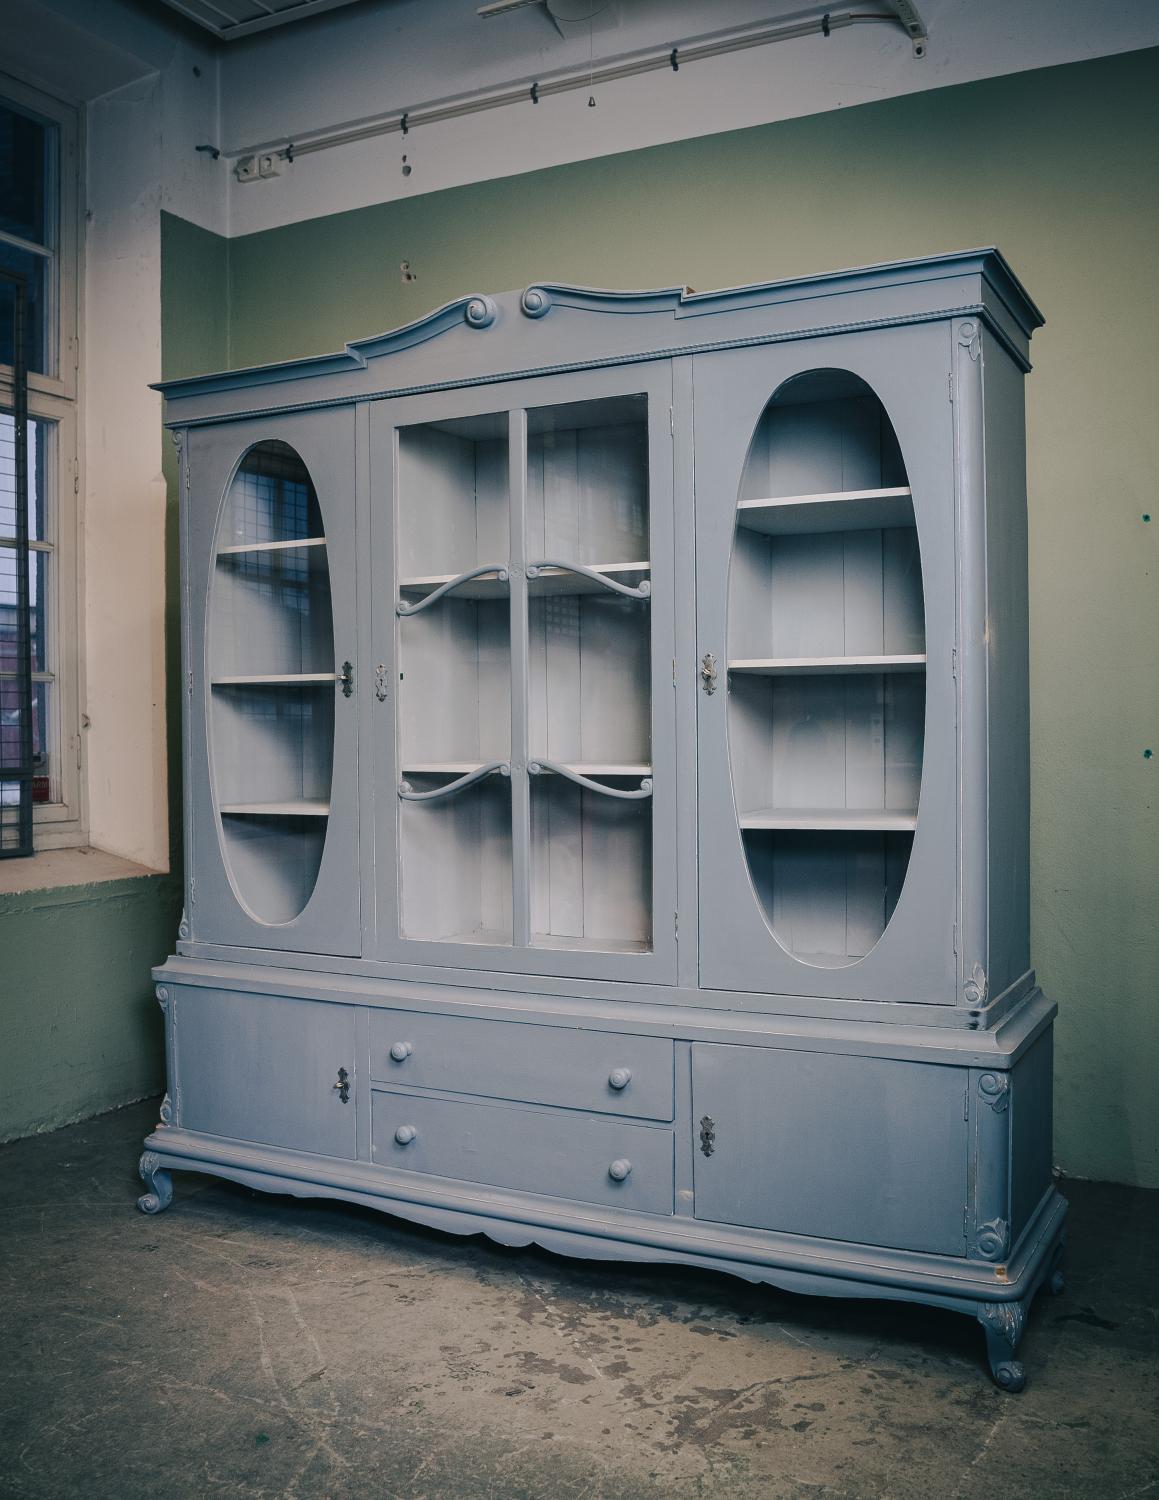 Blue Vintage Cabinet from the 1940s